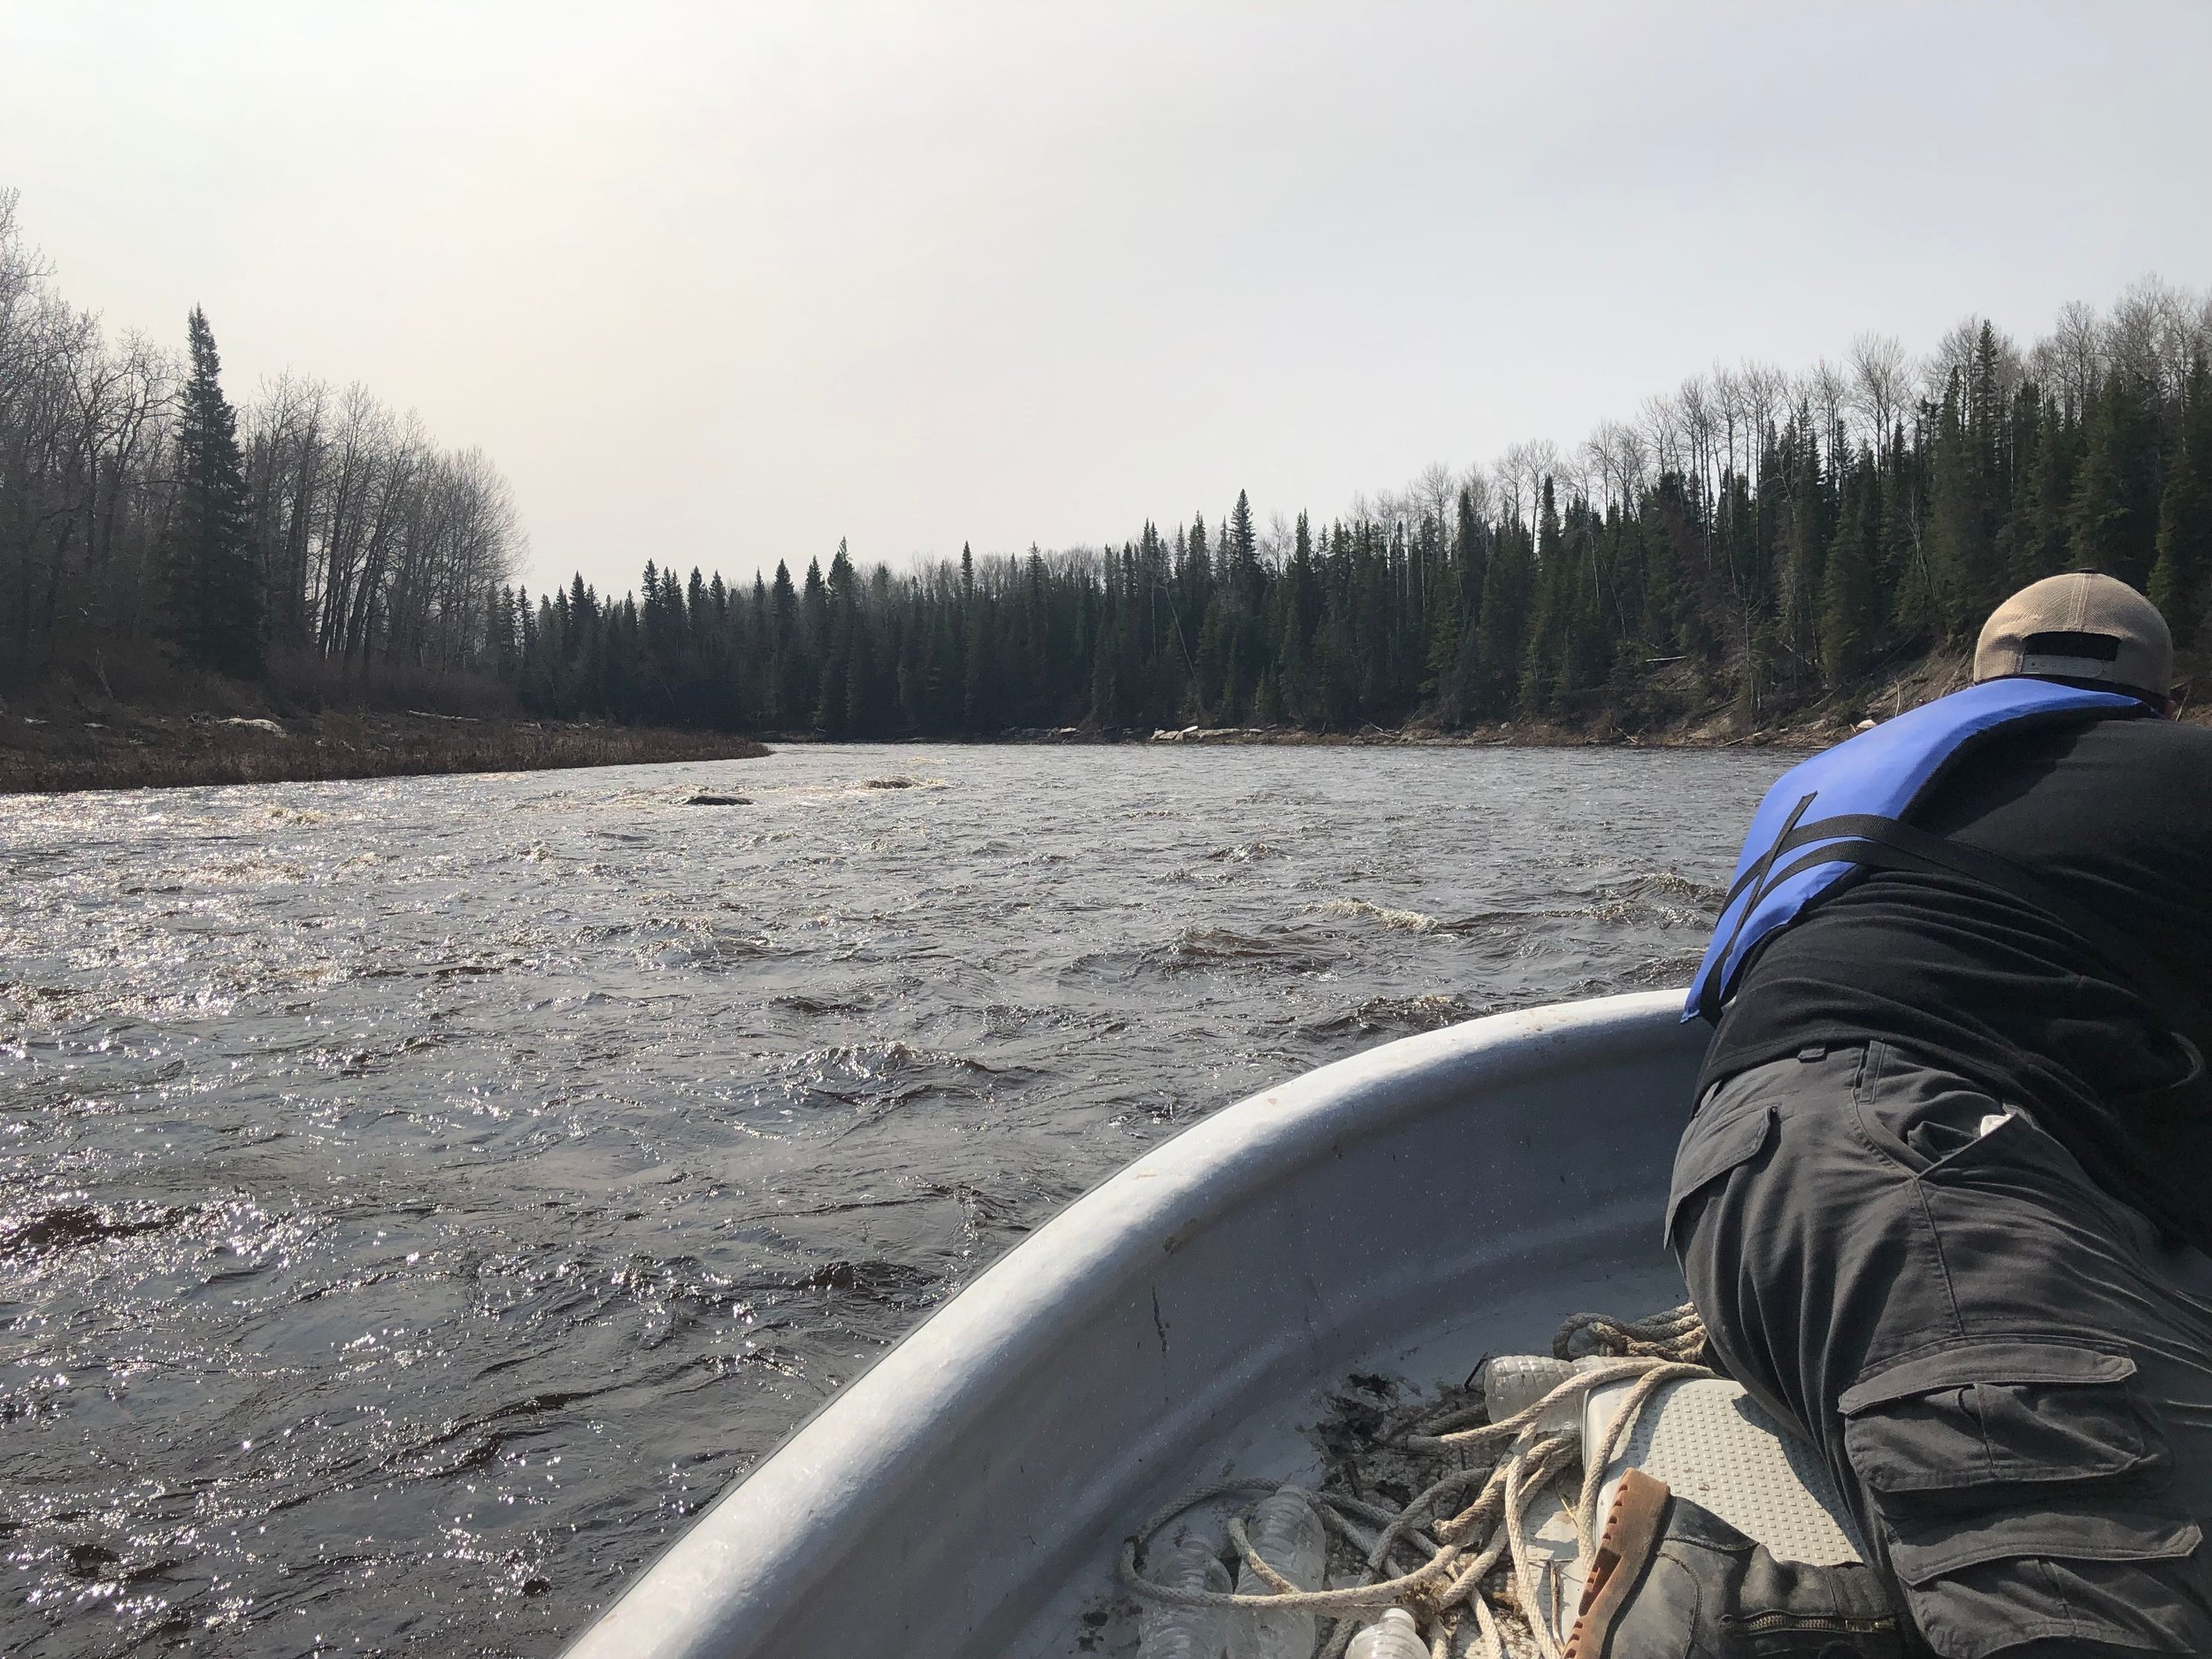 Keeping an eye out for rocks and snags in the rapids up the North French River